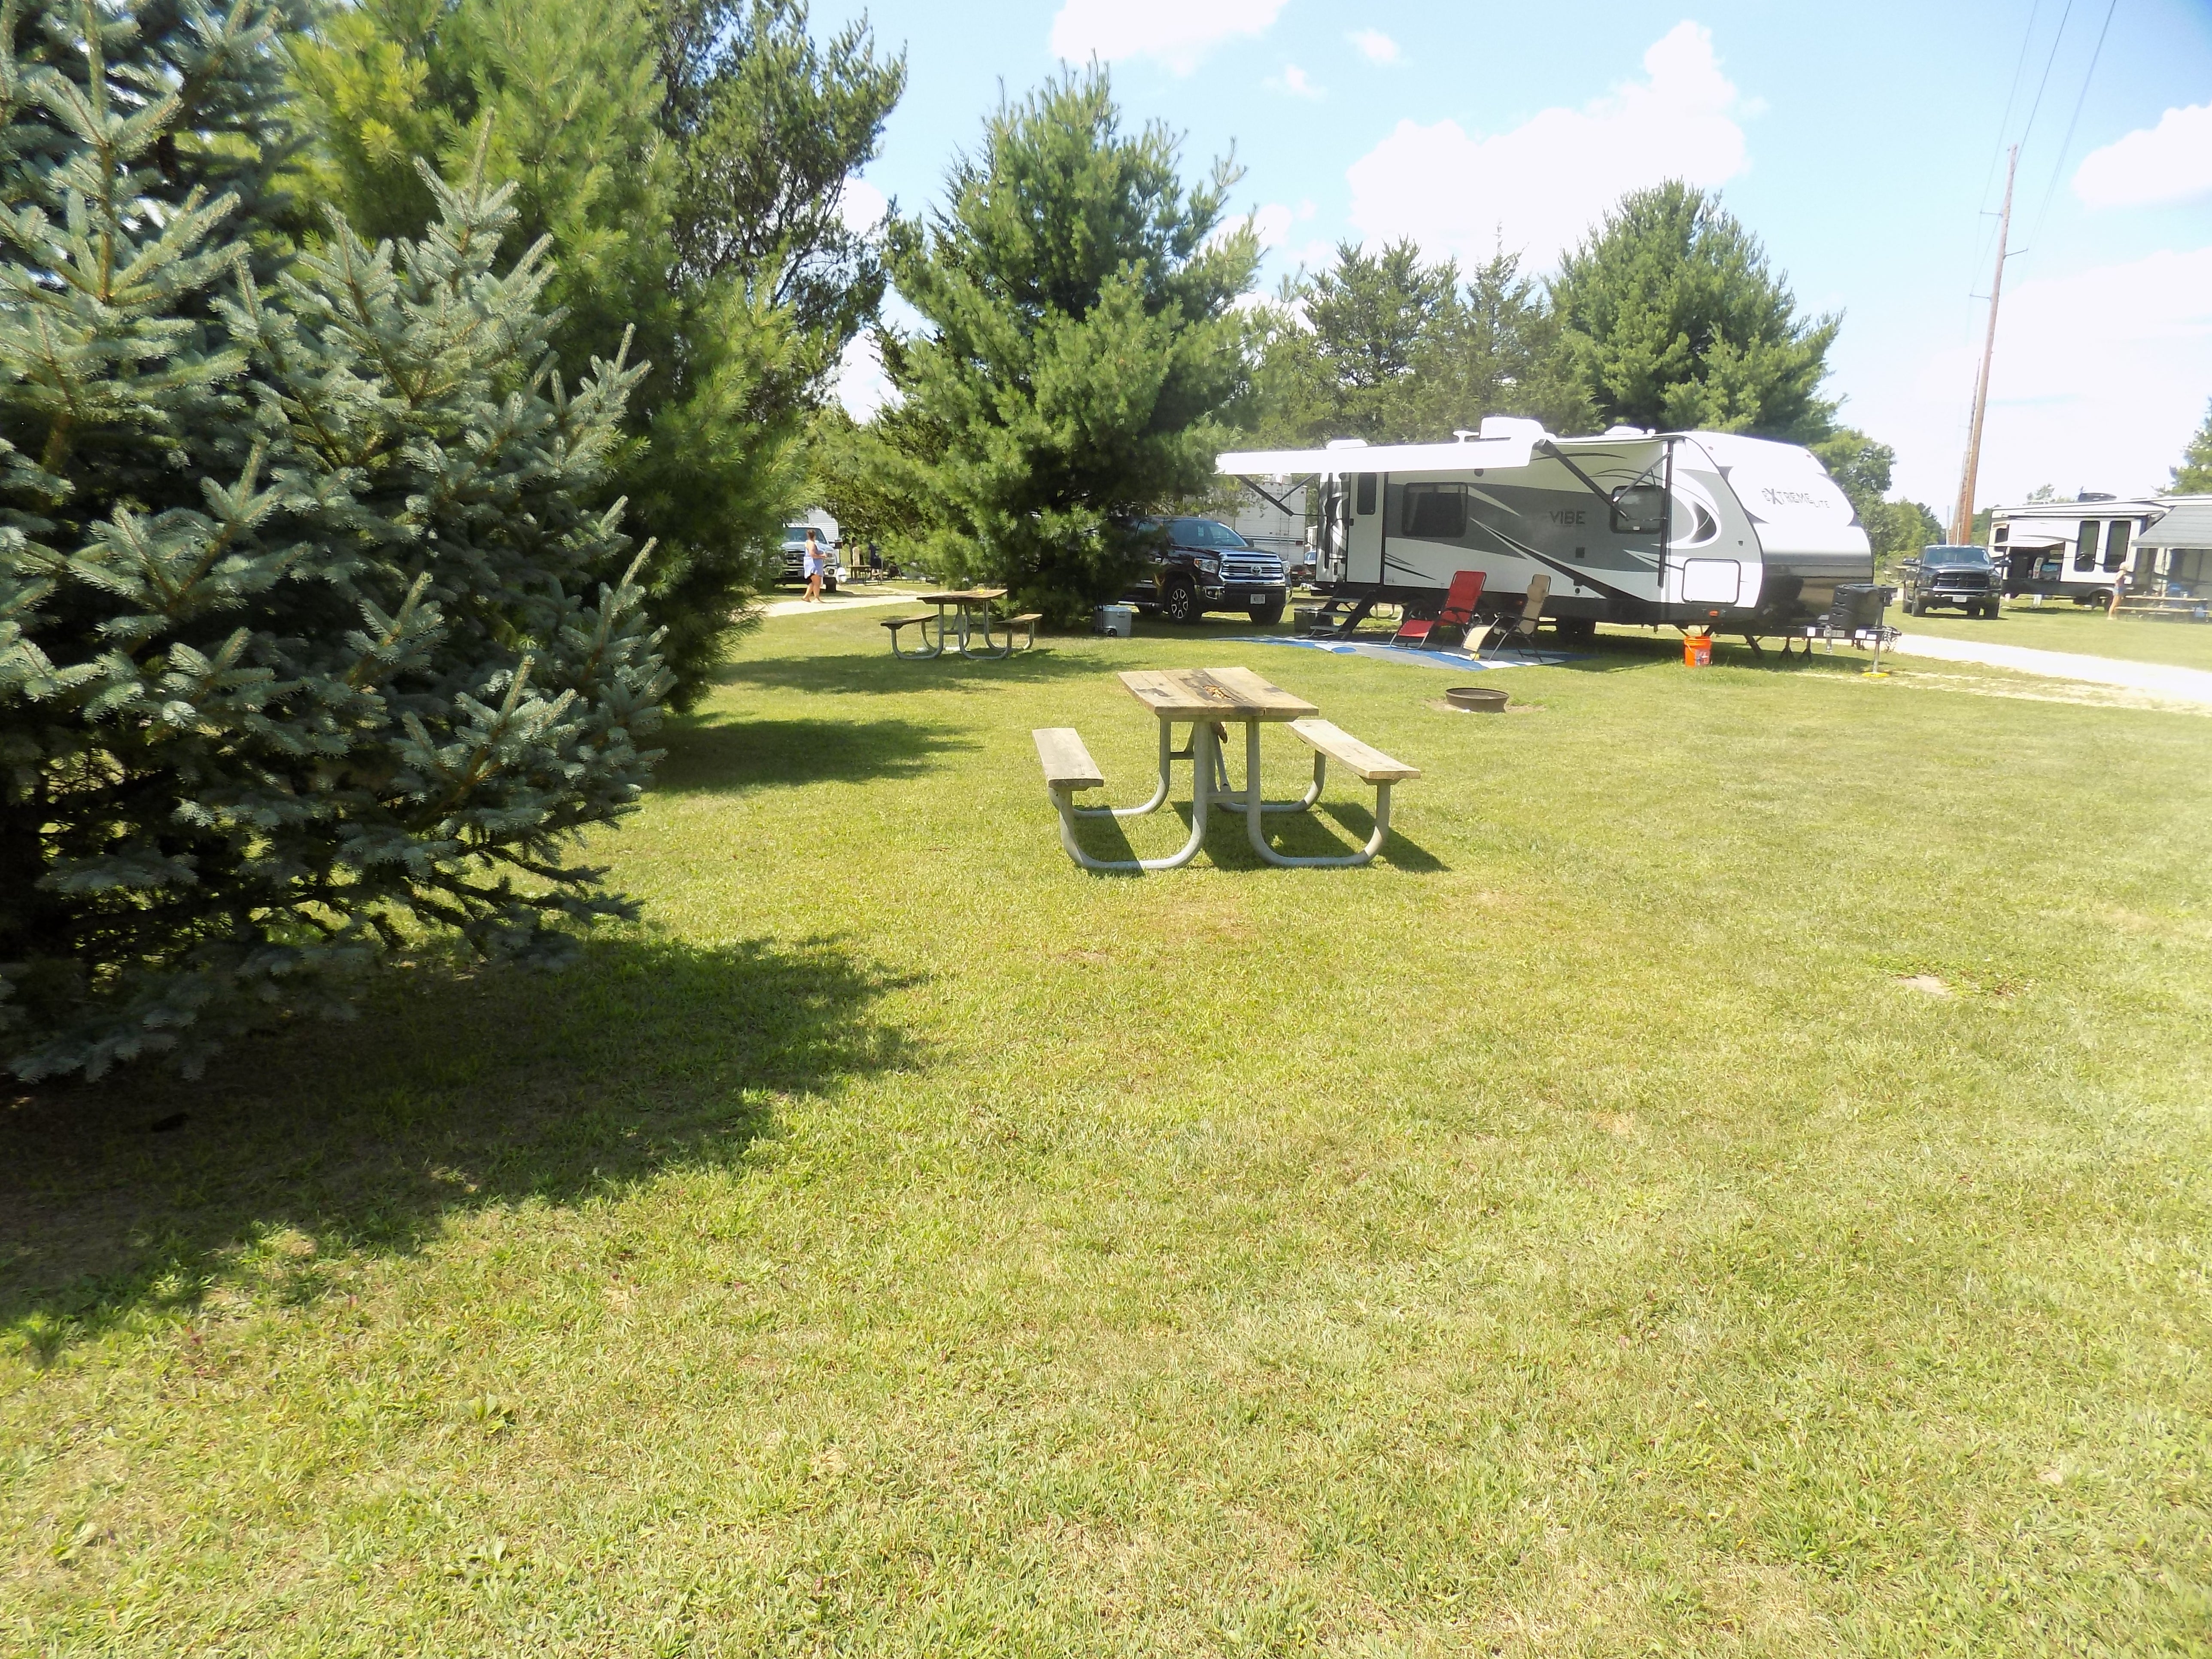 Our campsites have water, electric (20/30/50 amp), picnic table, fire-ring. We do have full hook up sites as well that offer sewer hook up. Onsite:
Garbage, dump station, restrooms, showers, volleyball court, horseshoe pit, laundry, pool, hot tub, porta potty, tiki bar, water, bar and restaurant.